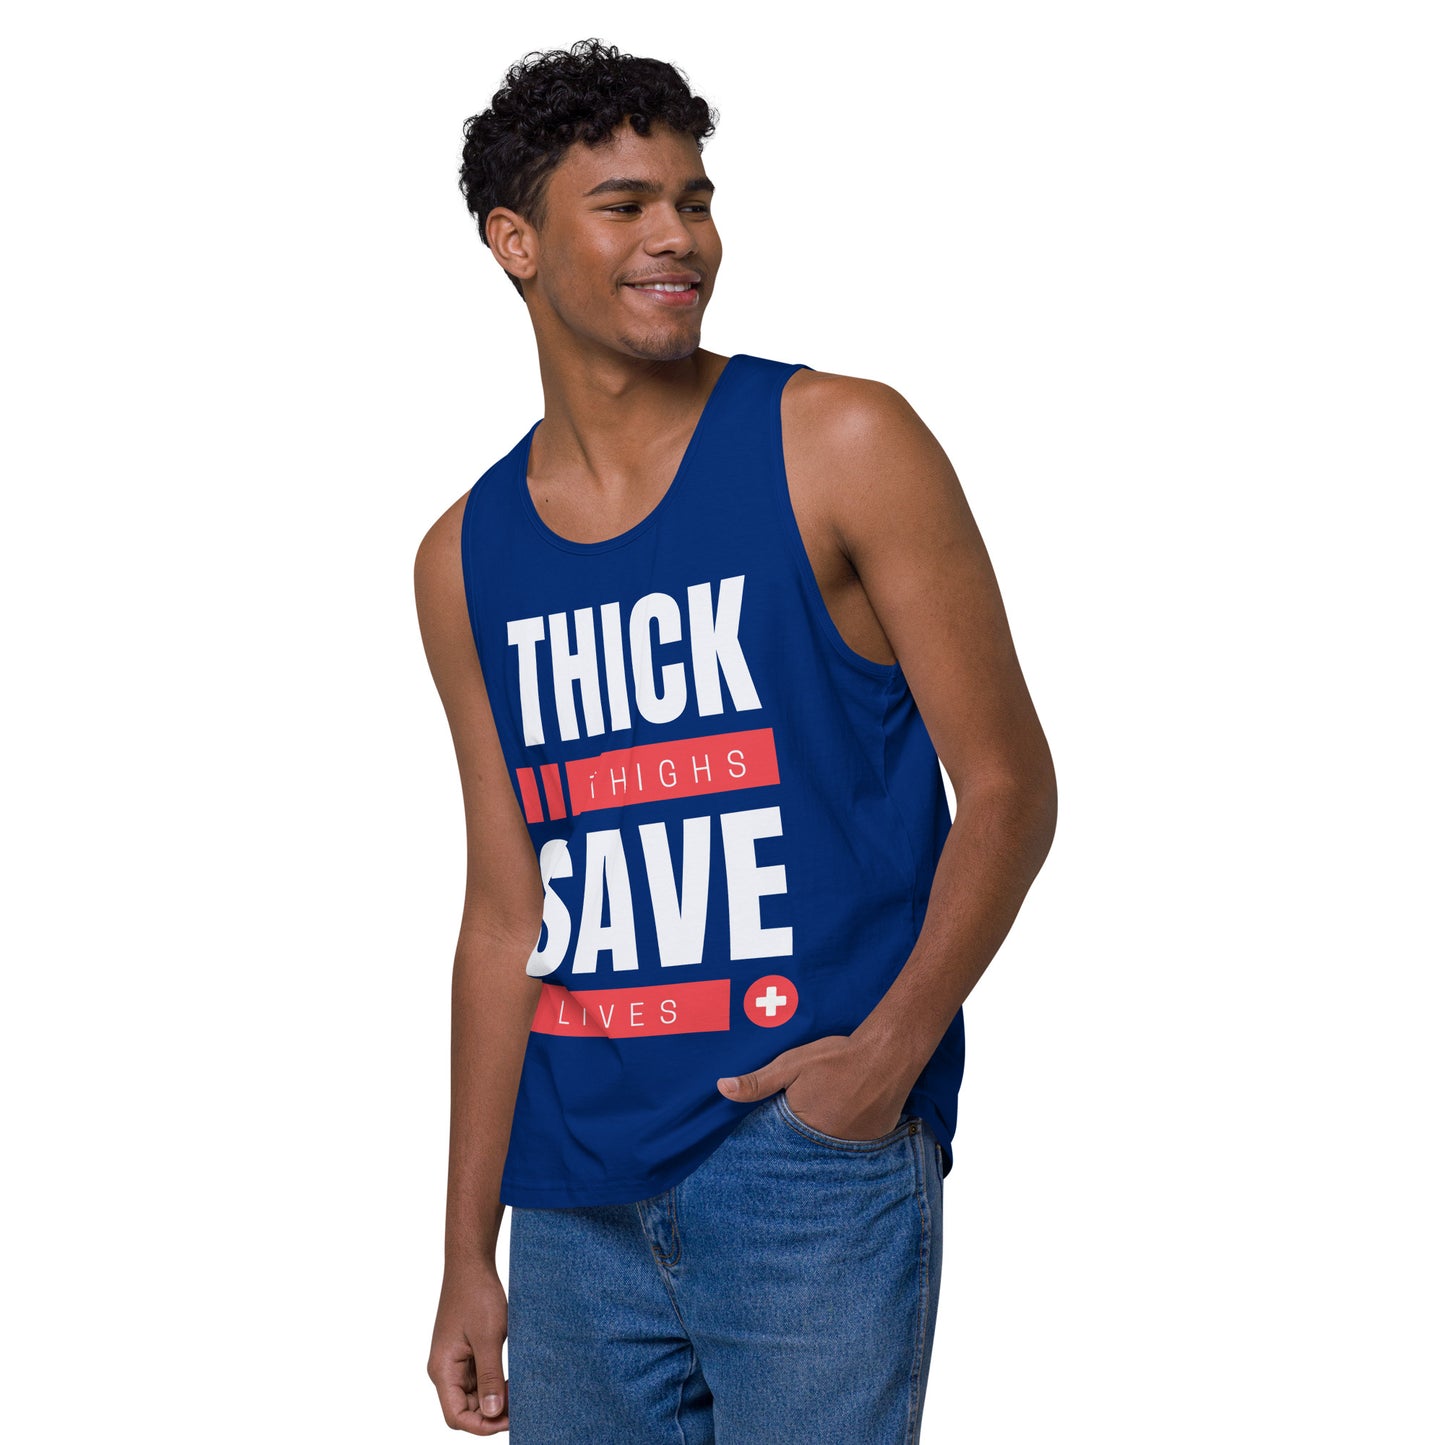 Thick thighs save lives- Men’s premium tank top